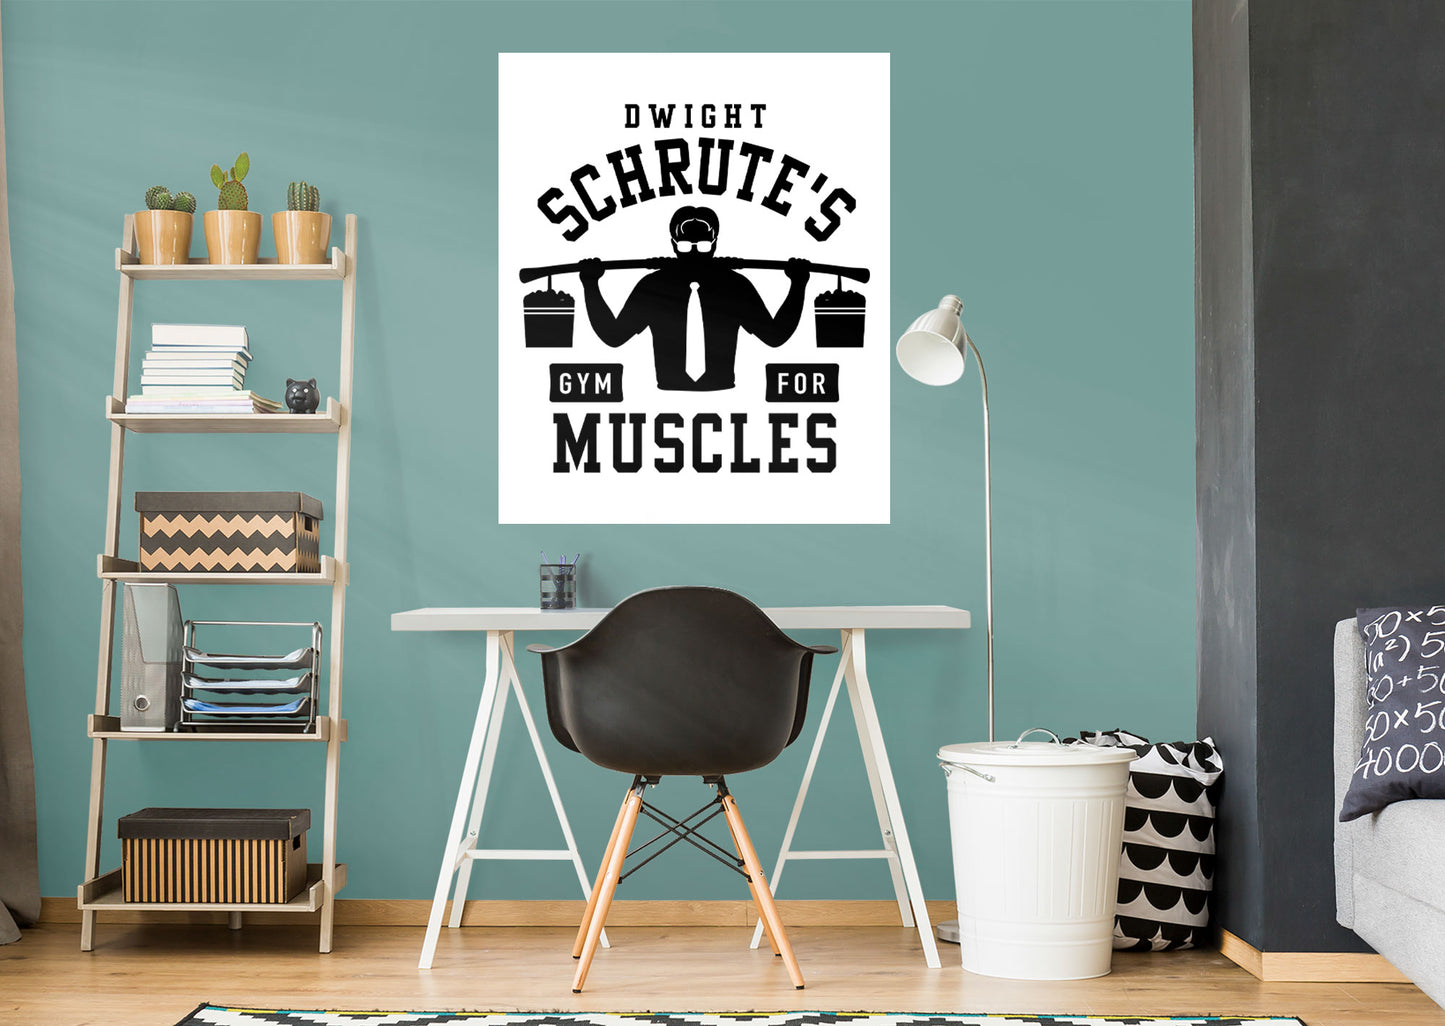 The Office: Dwight's Gym Mural        - Officially Licensed NBC Universal Removable Wall   Adhesive Decal